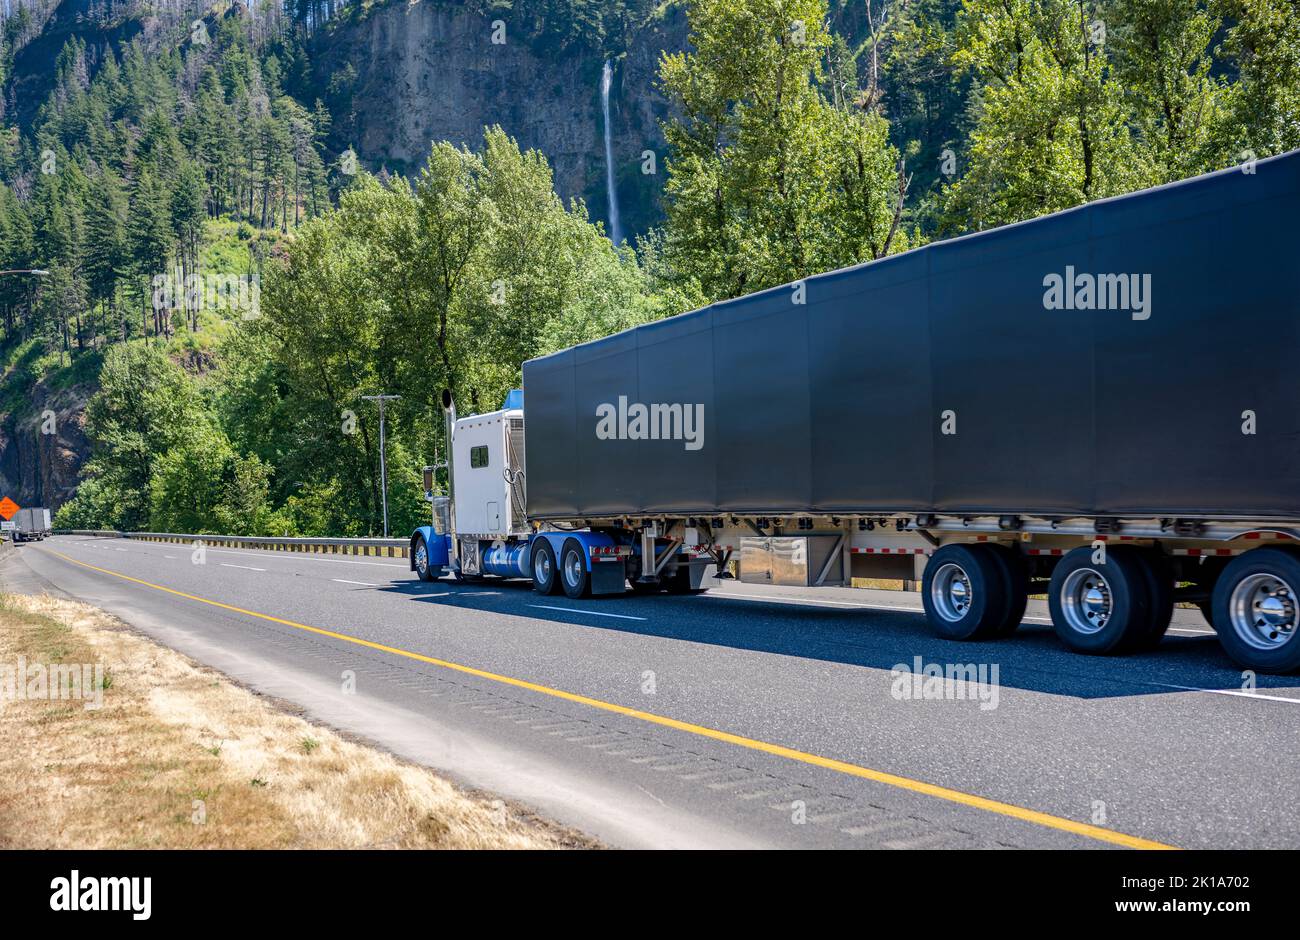 Industrial classic big rig white American semi truck tractor with cab sleeping compartment transporting cargo in dry van semi trailer driving on the r Stock Photo